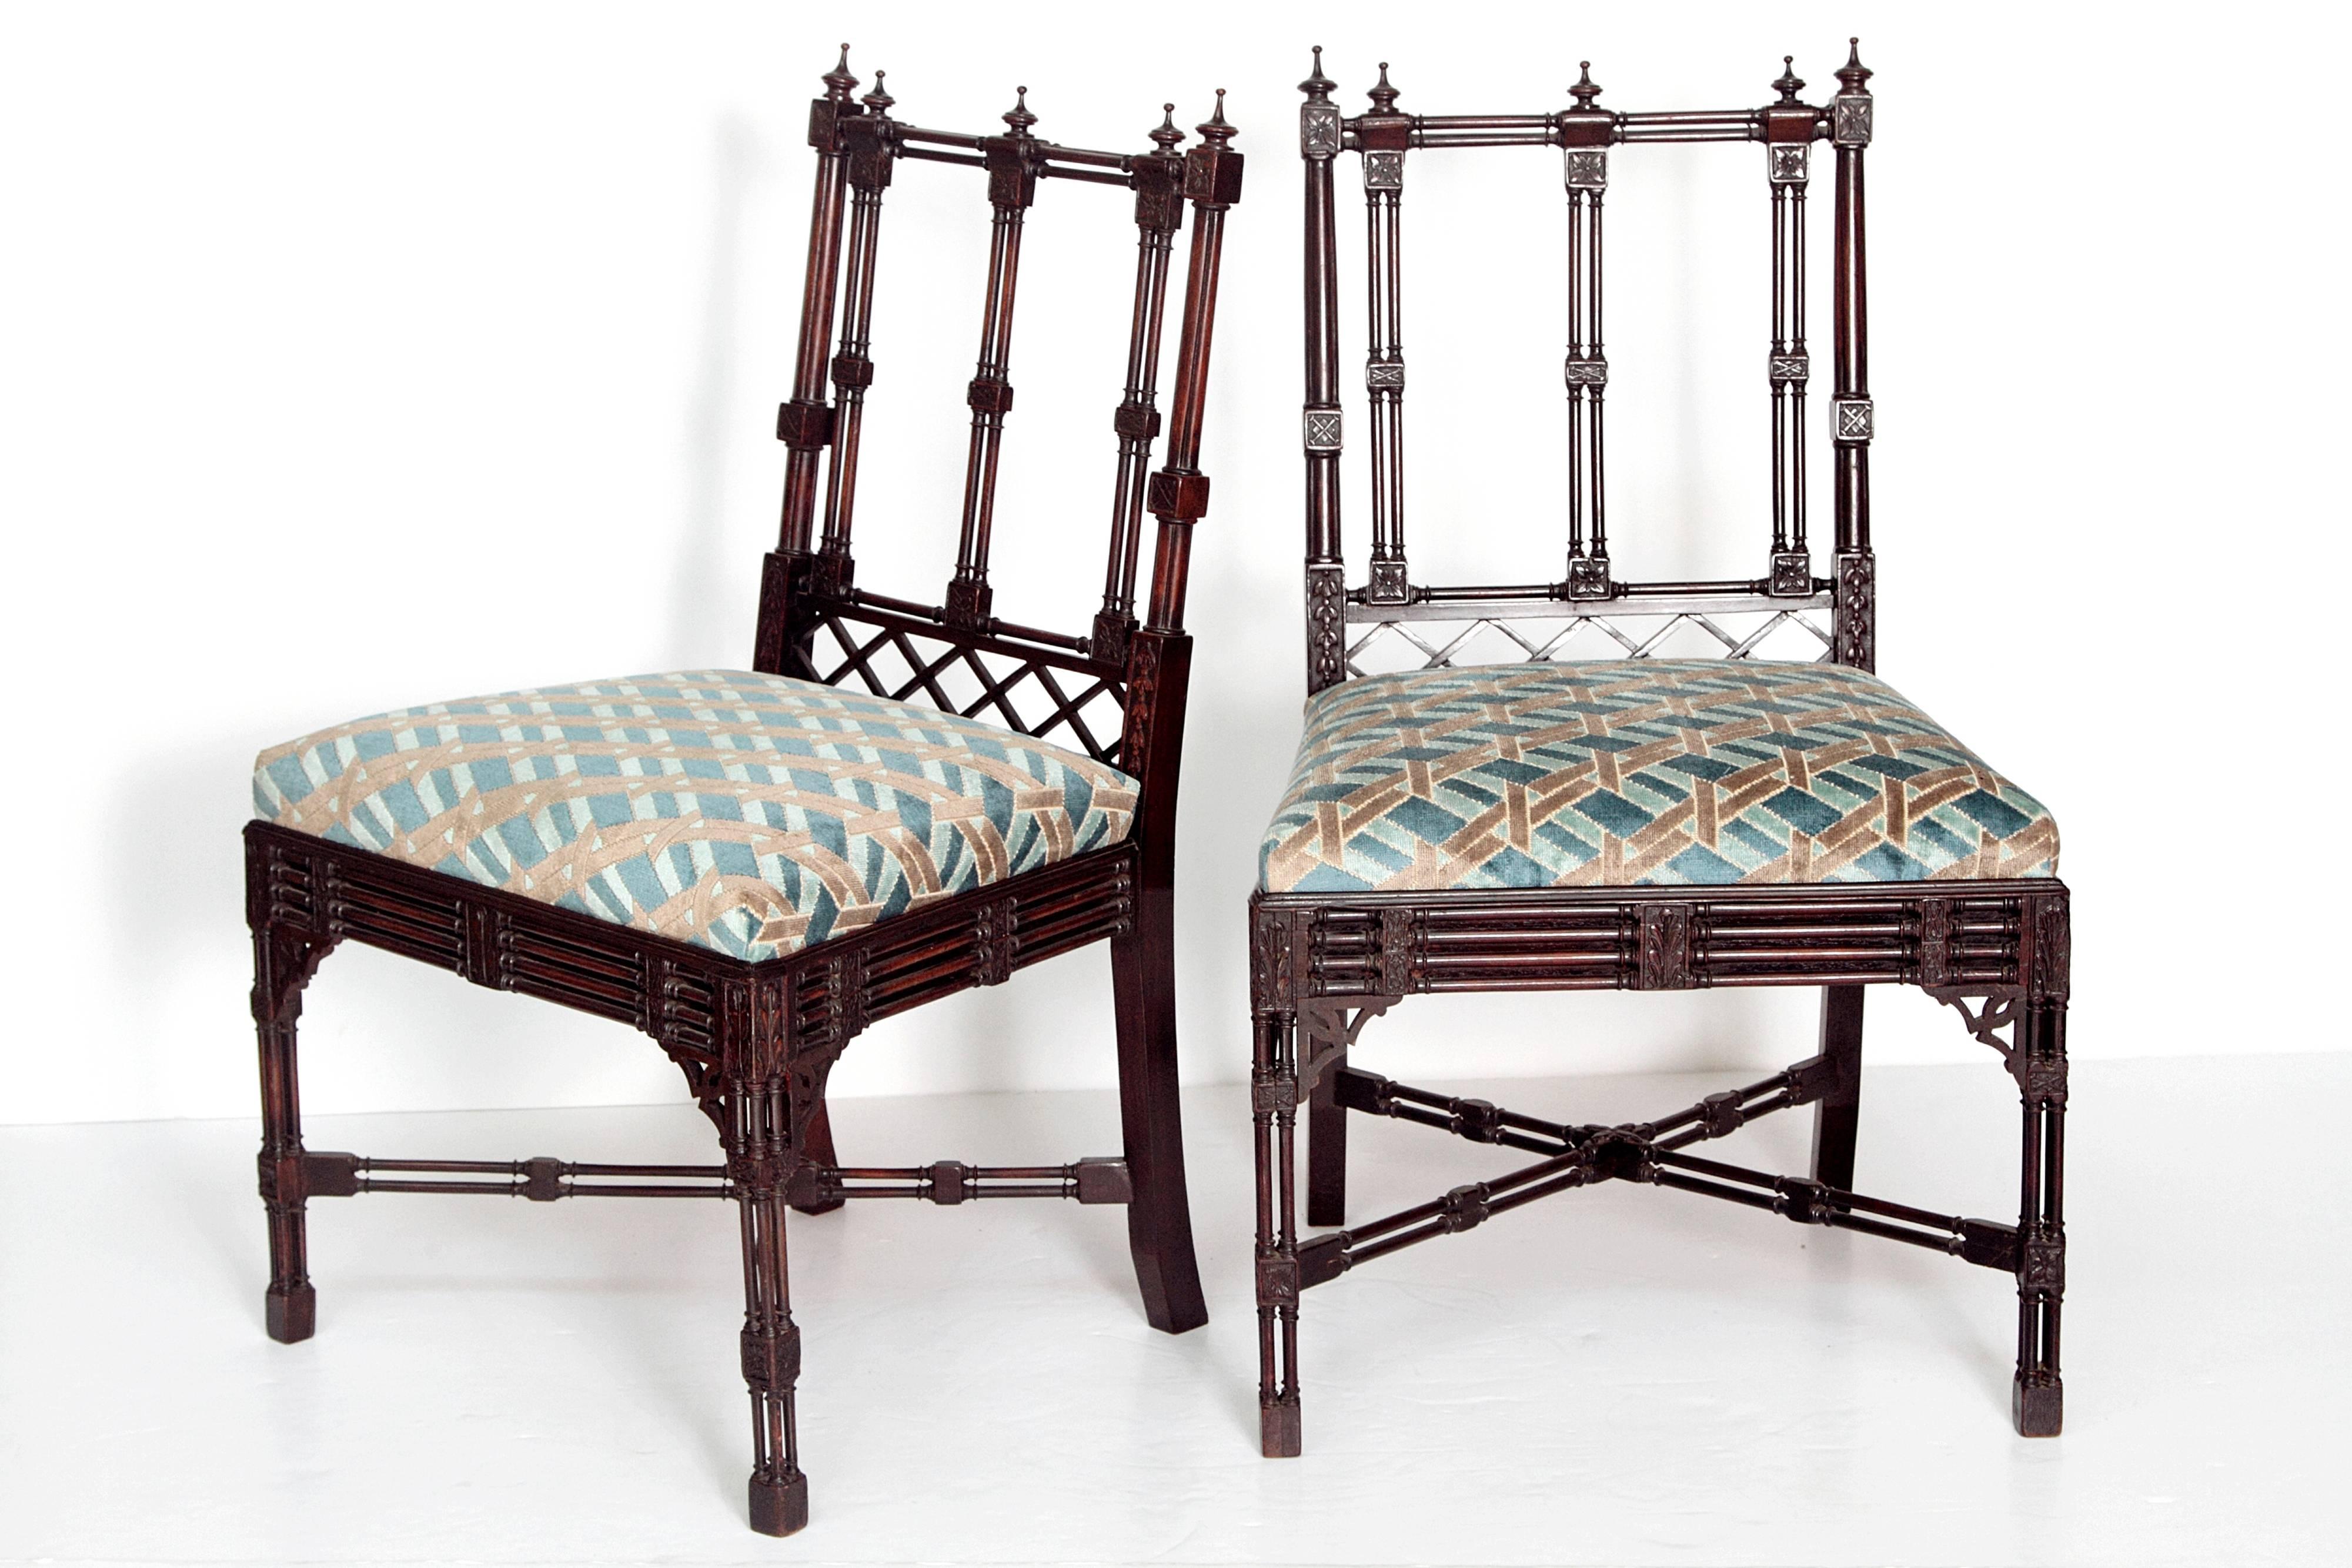 A group of late 19th century mahogany Georgian Revival Chinese Chippendale style chairs. Backs have delicate spindles and 